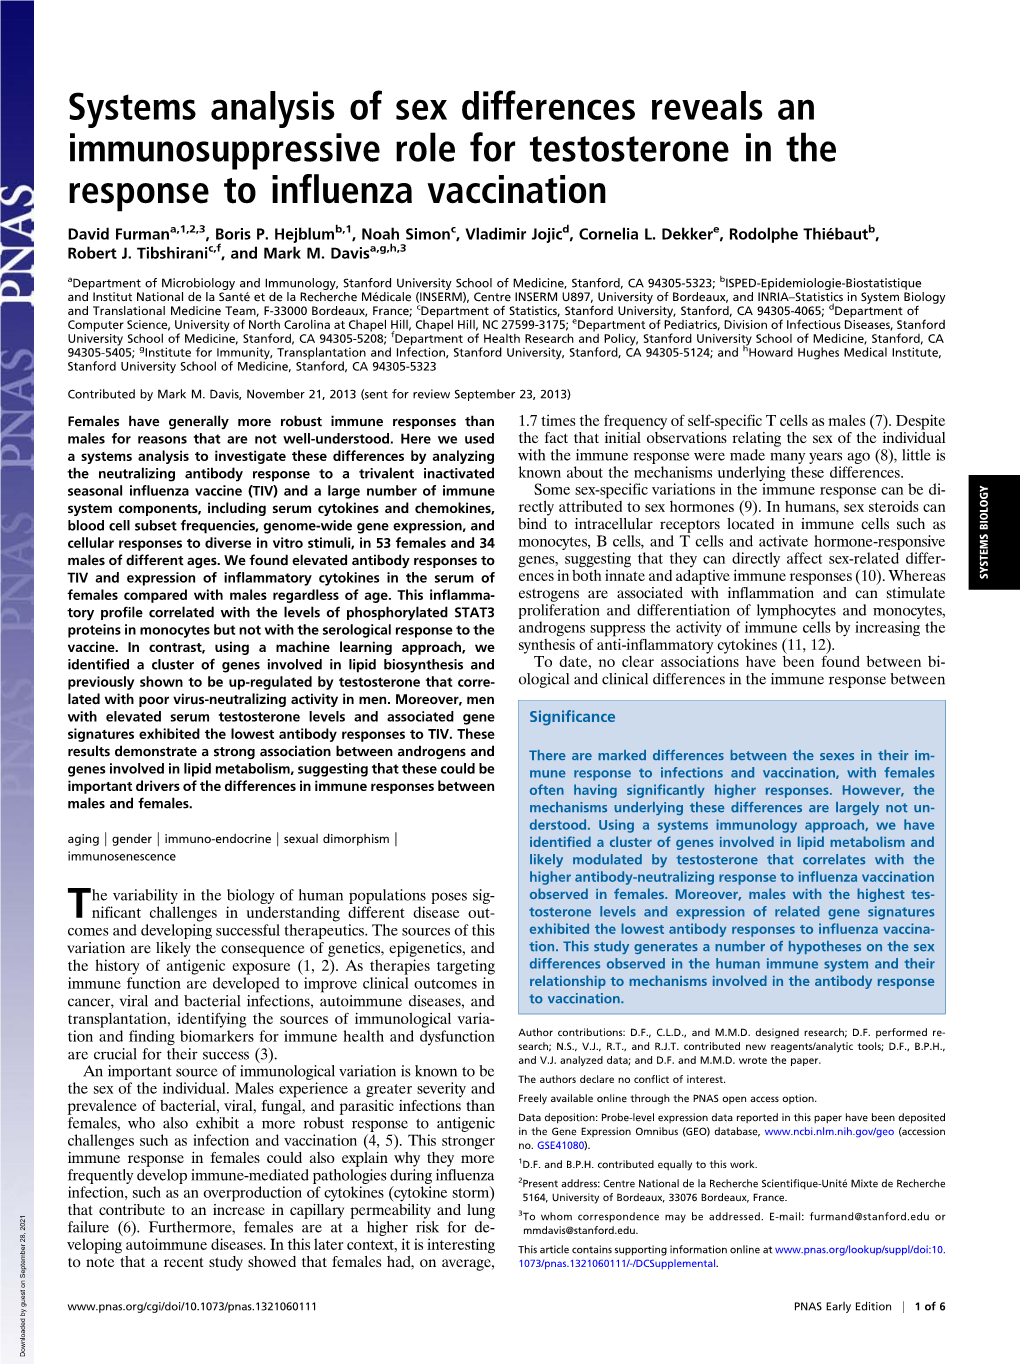 Systems Analysis of Sex Differences Reveals an Immunosuppressive Role for Testosterone in the Response to Influenza Vaccination